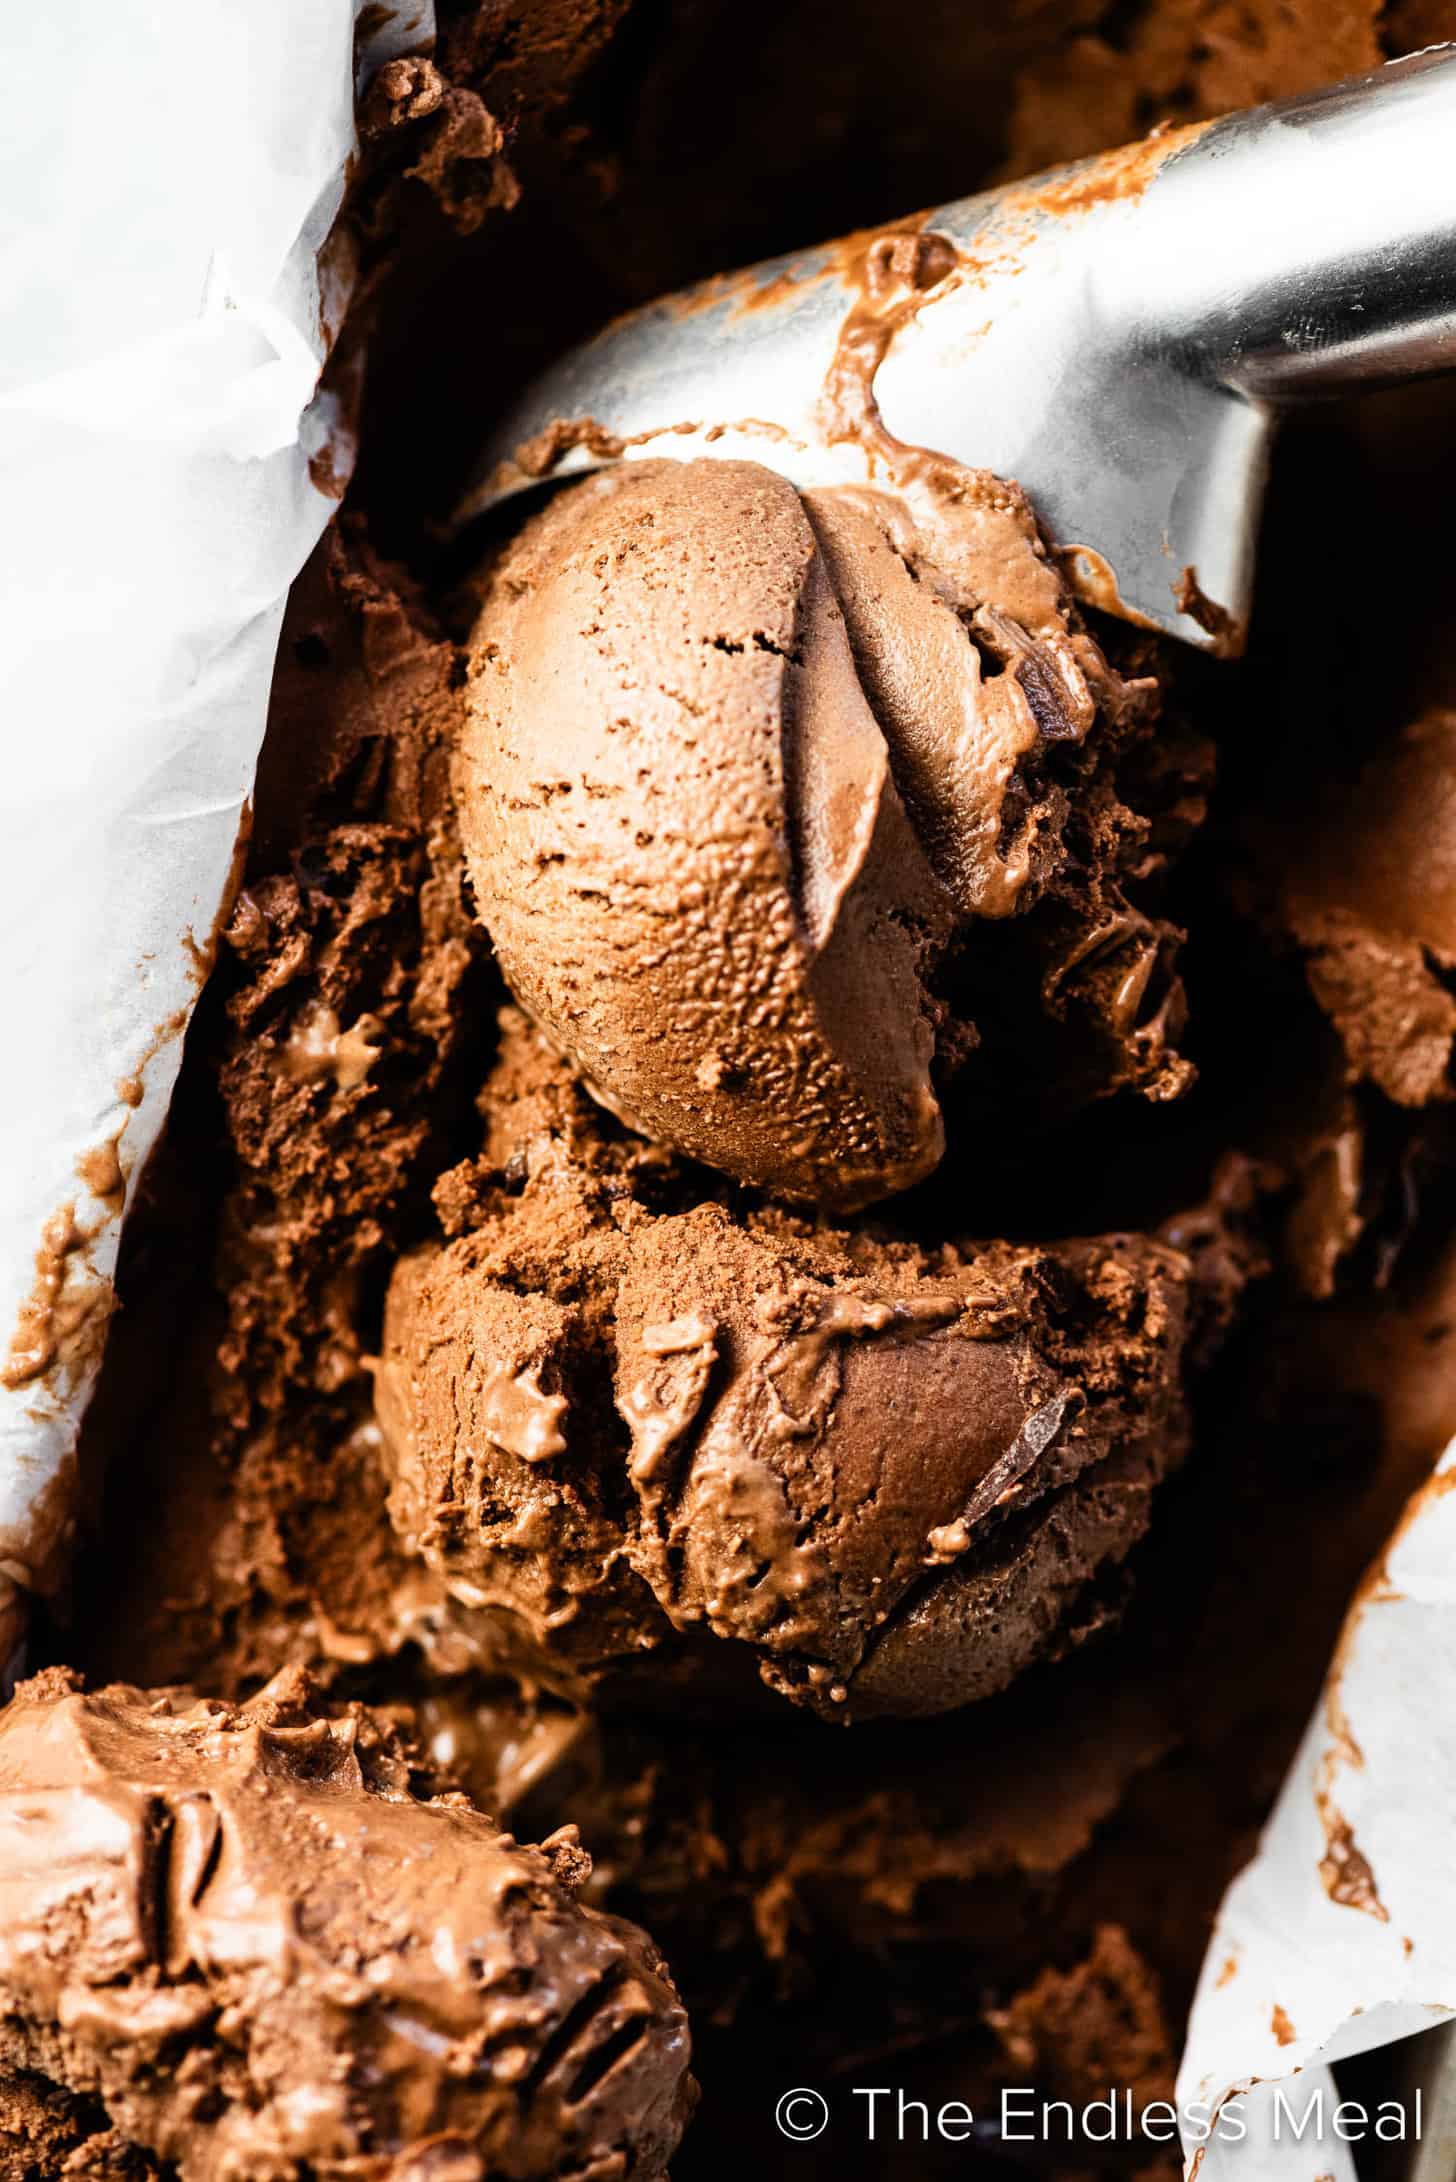 A close up of scoops of Chocolate Banana Ice Cream